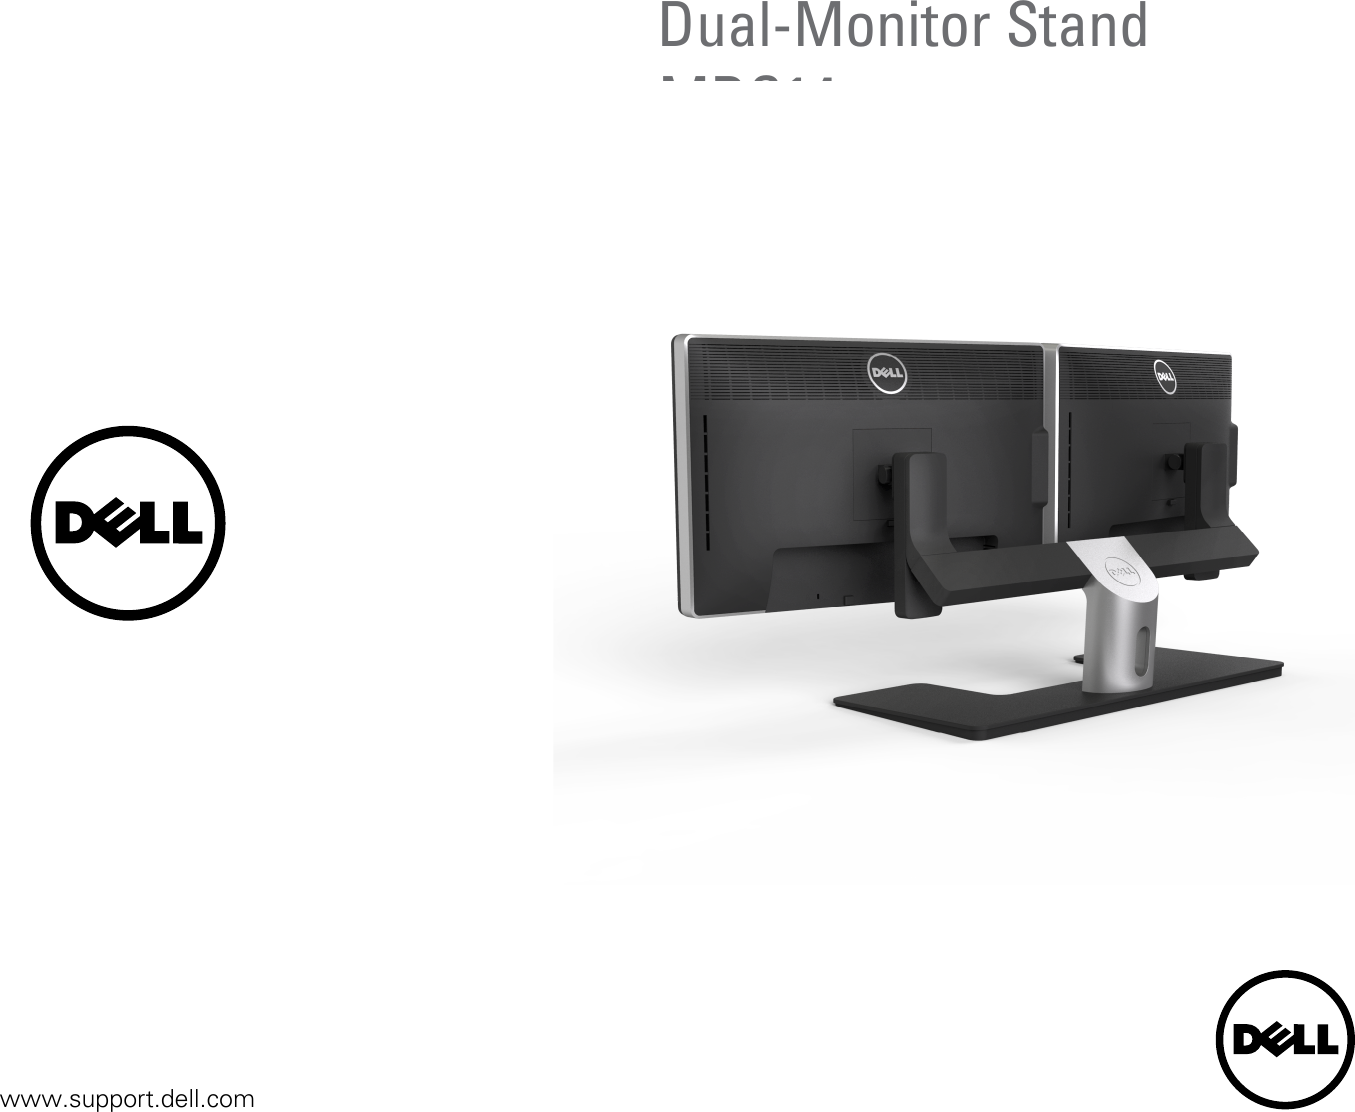 Page 1 of 2 - Dell Dell-Dual-Arm-Monitor-Mda14-Setup-Guide- Dual-Monitor Stand MDS14 Setup Guide  Dell-dual-arm-monitor-mda14-setup-guide